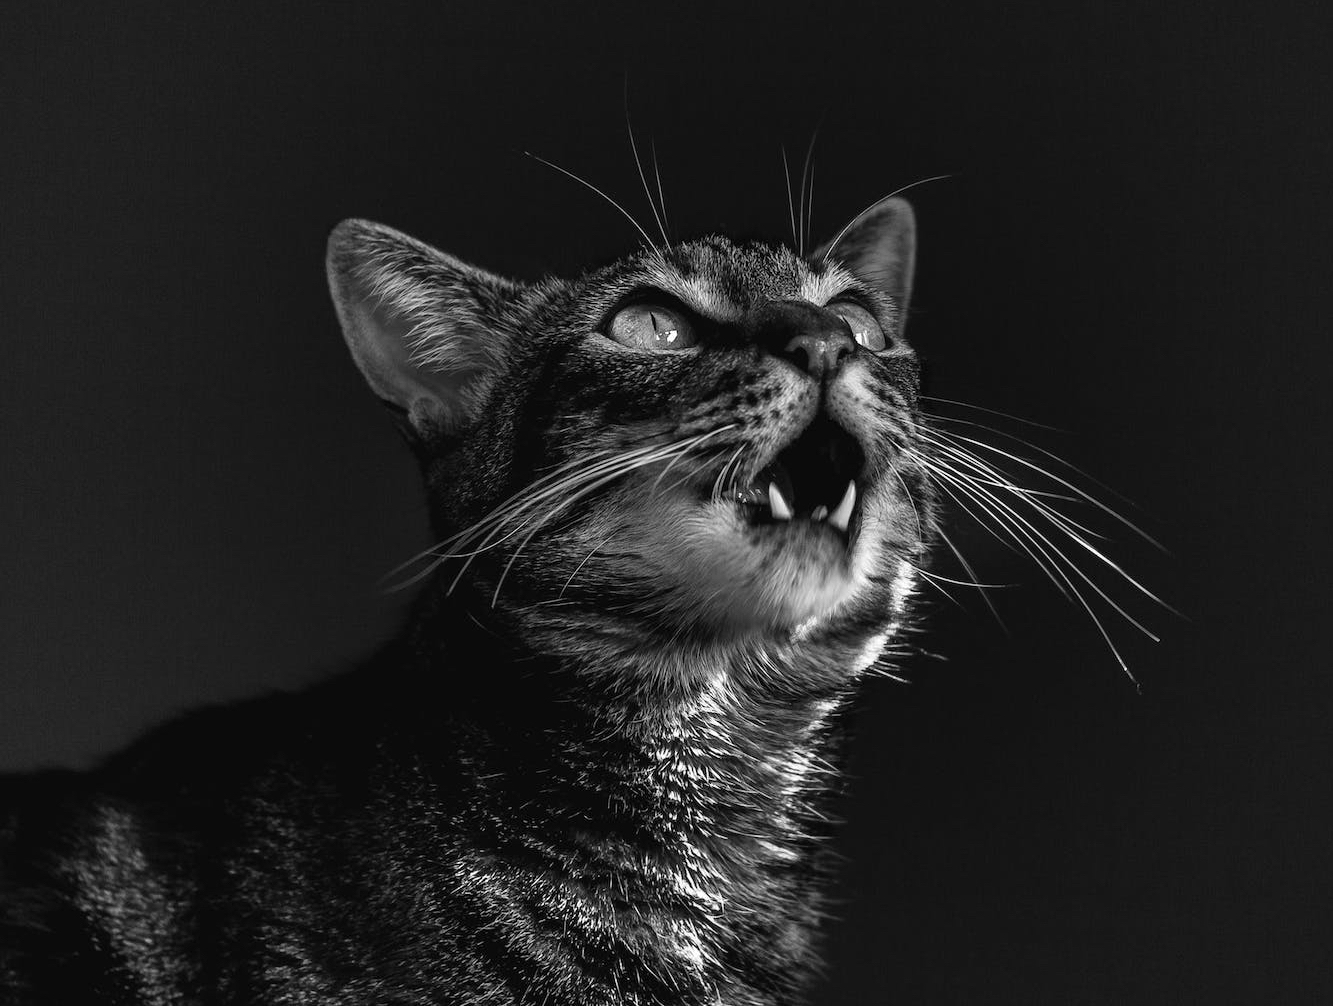 black and white photograph of a cat meowing